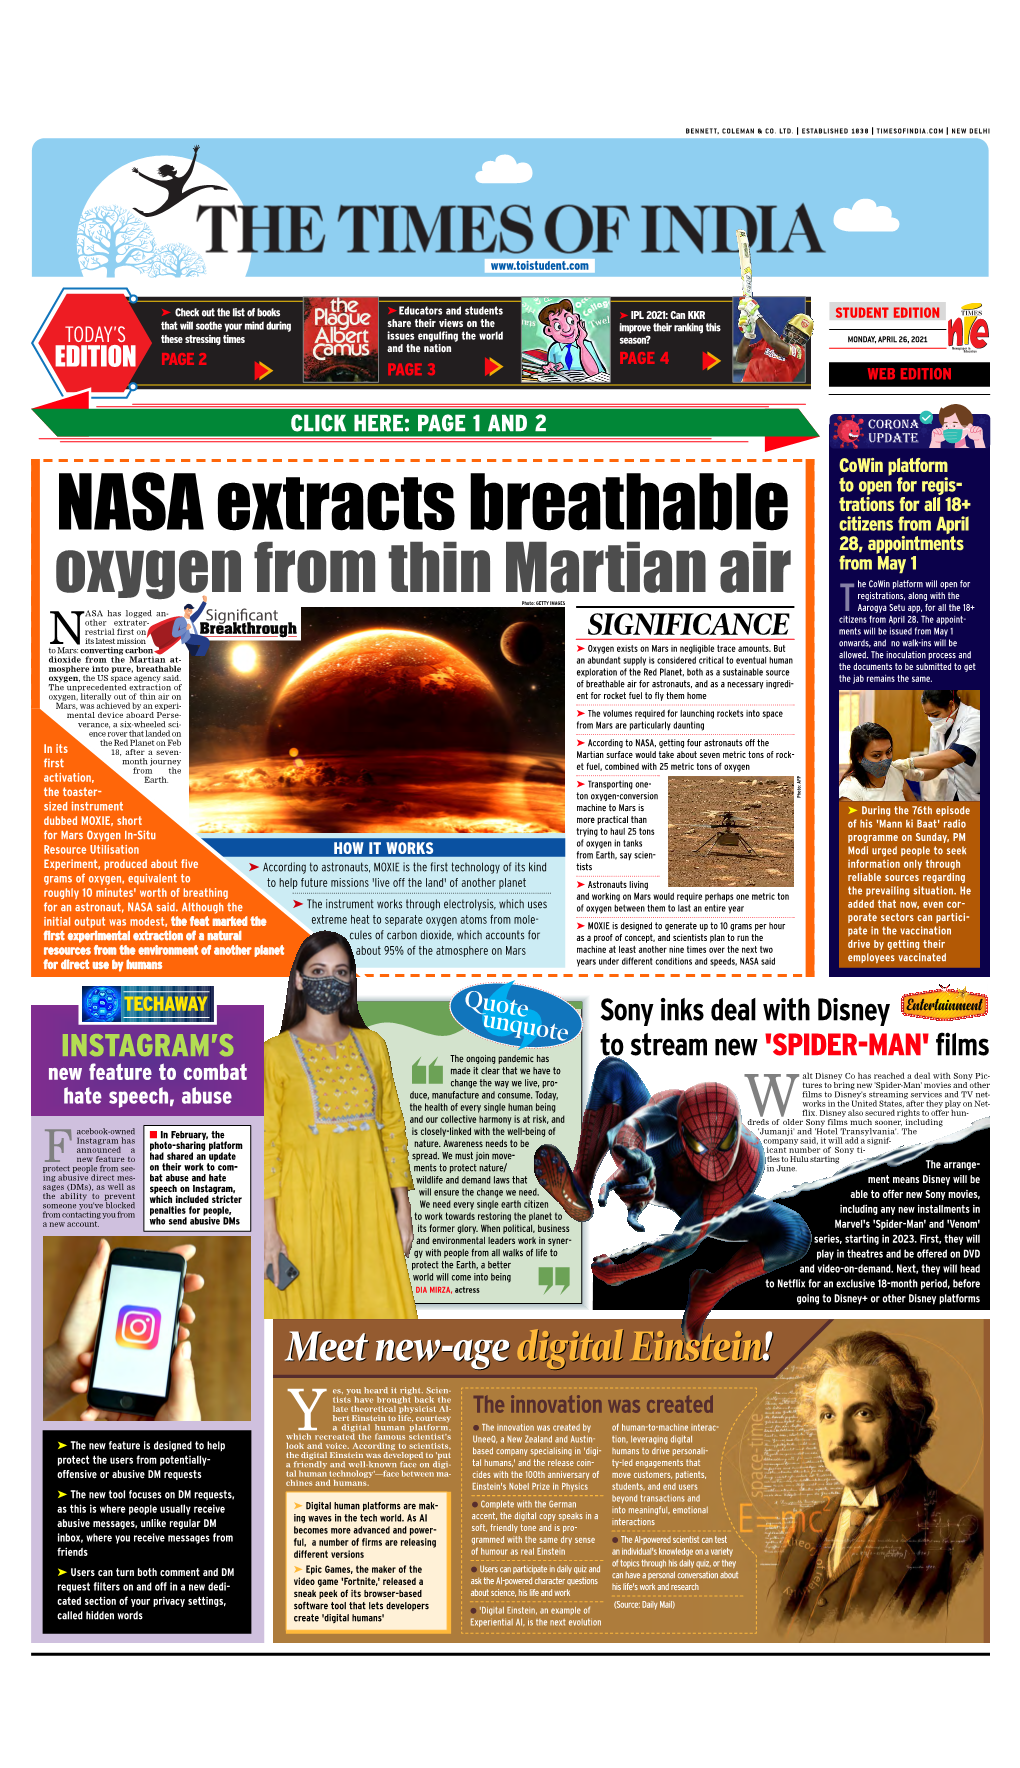 Oxygen from Thin Martian